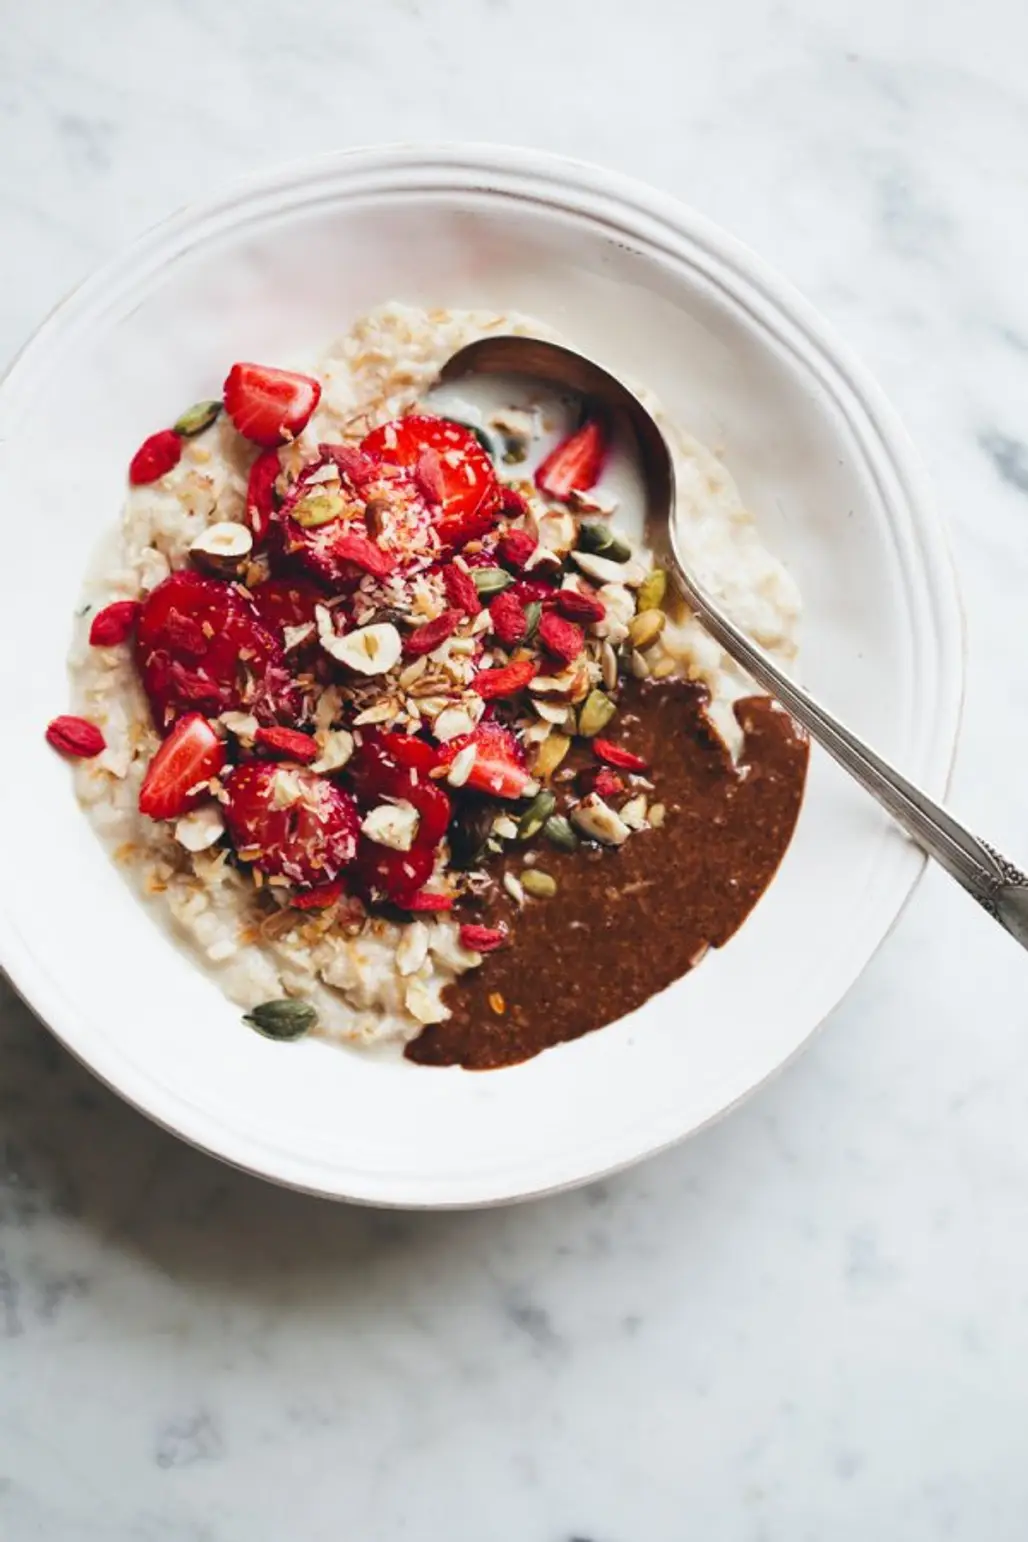 Oatmeal Isn’t Just for Breakfast Anymore